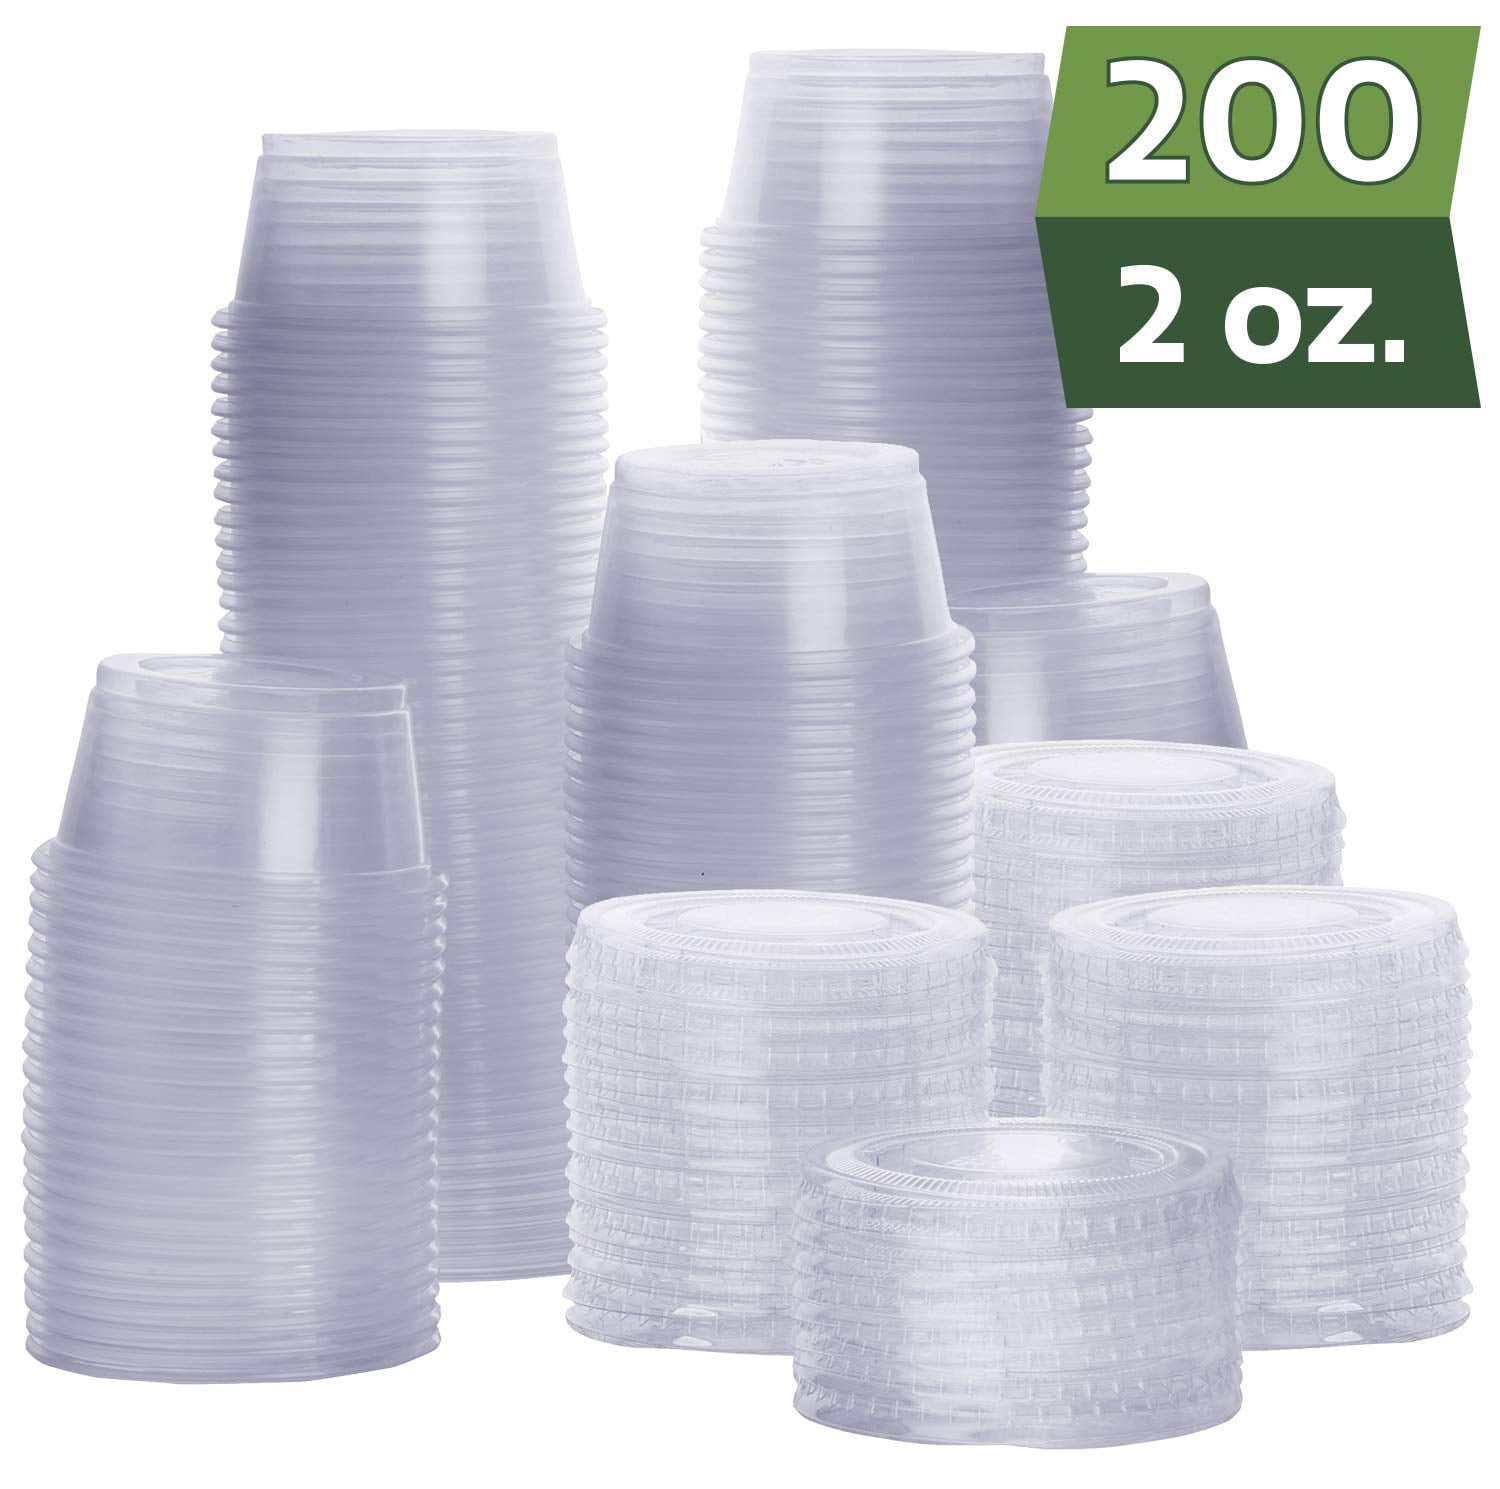 2.5 oz. No Lids 250 Large Jell-O Shot Souffle Portion Cups Clear Plastic 